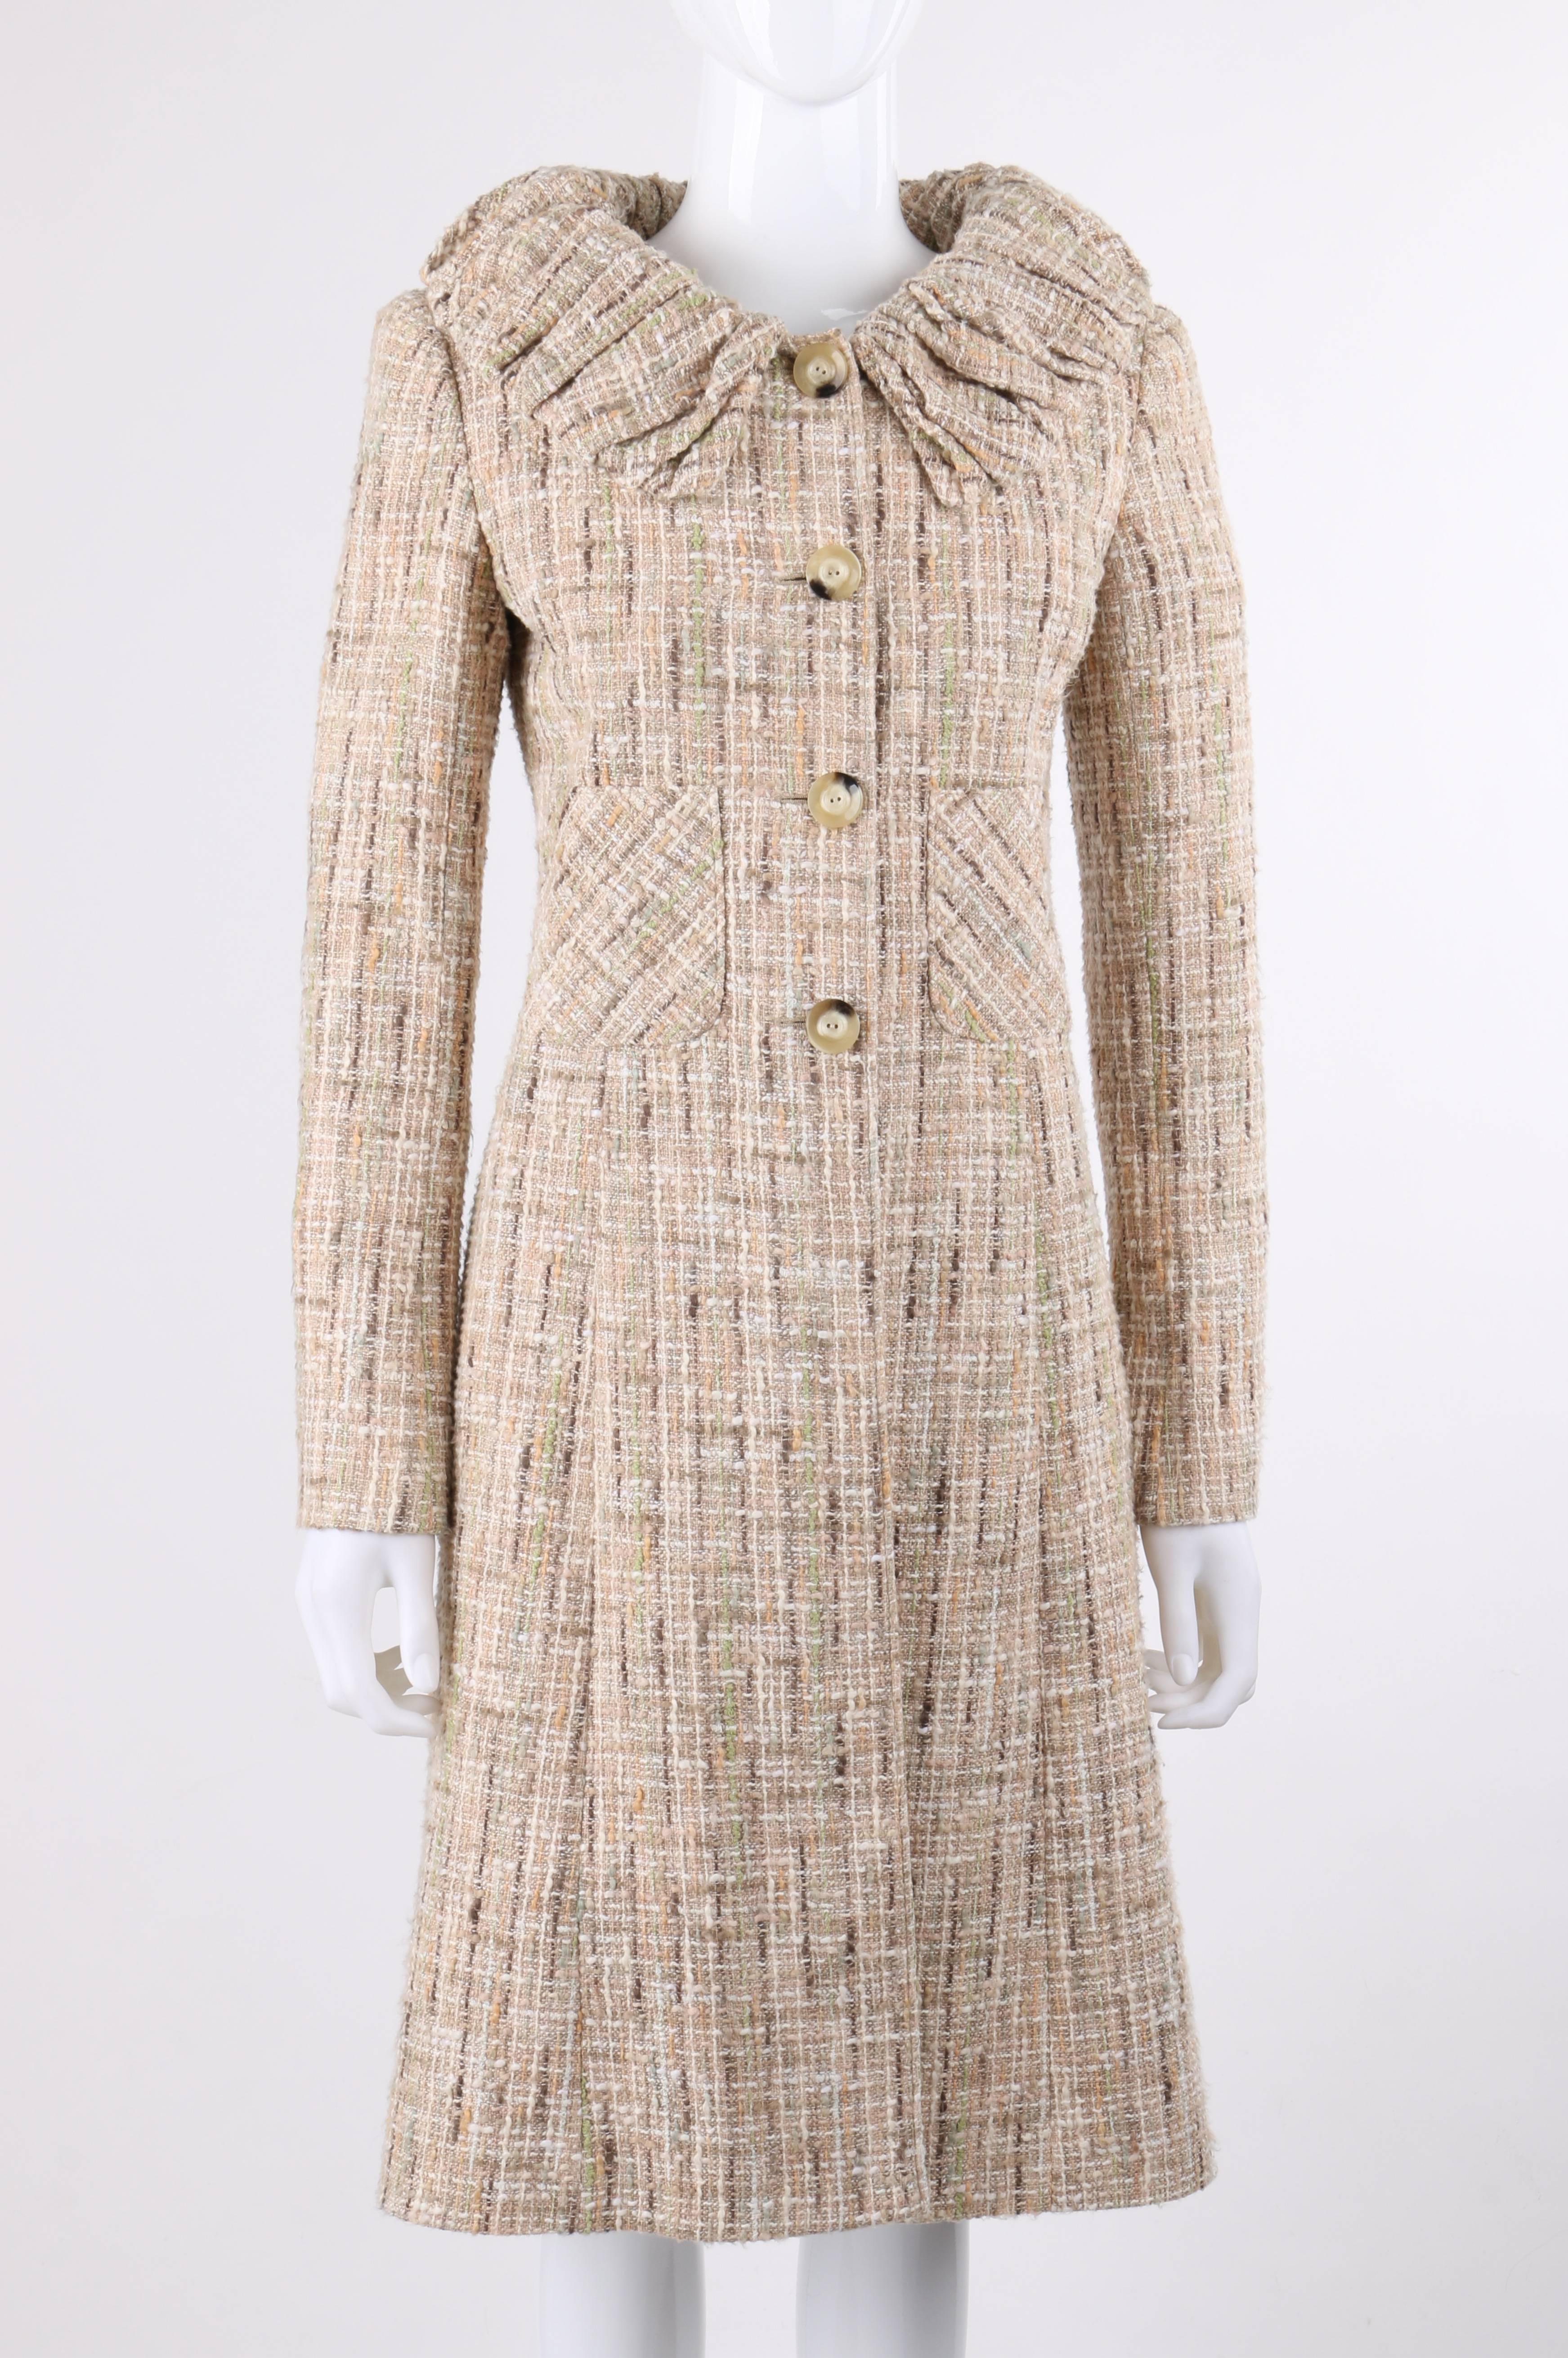 Valentino Autumn/Winter 2008 cotton blend tweed princess coat. Multicolor cotton tweed in shades of beige, cream, brown, green, blue, and peach. Large gathered peter pan collar. Four center front button closures. Long sleeves. Two front patch